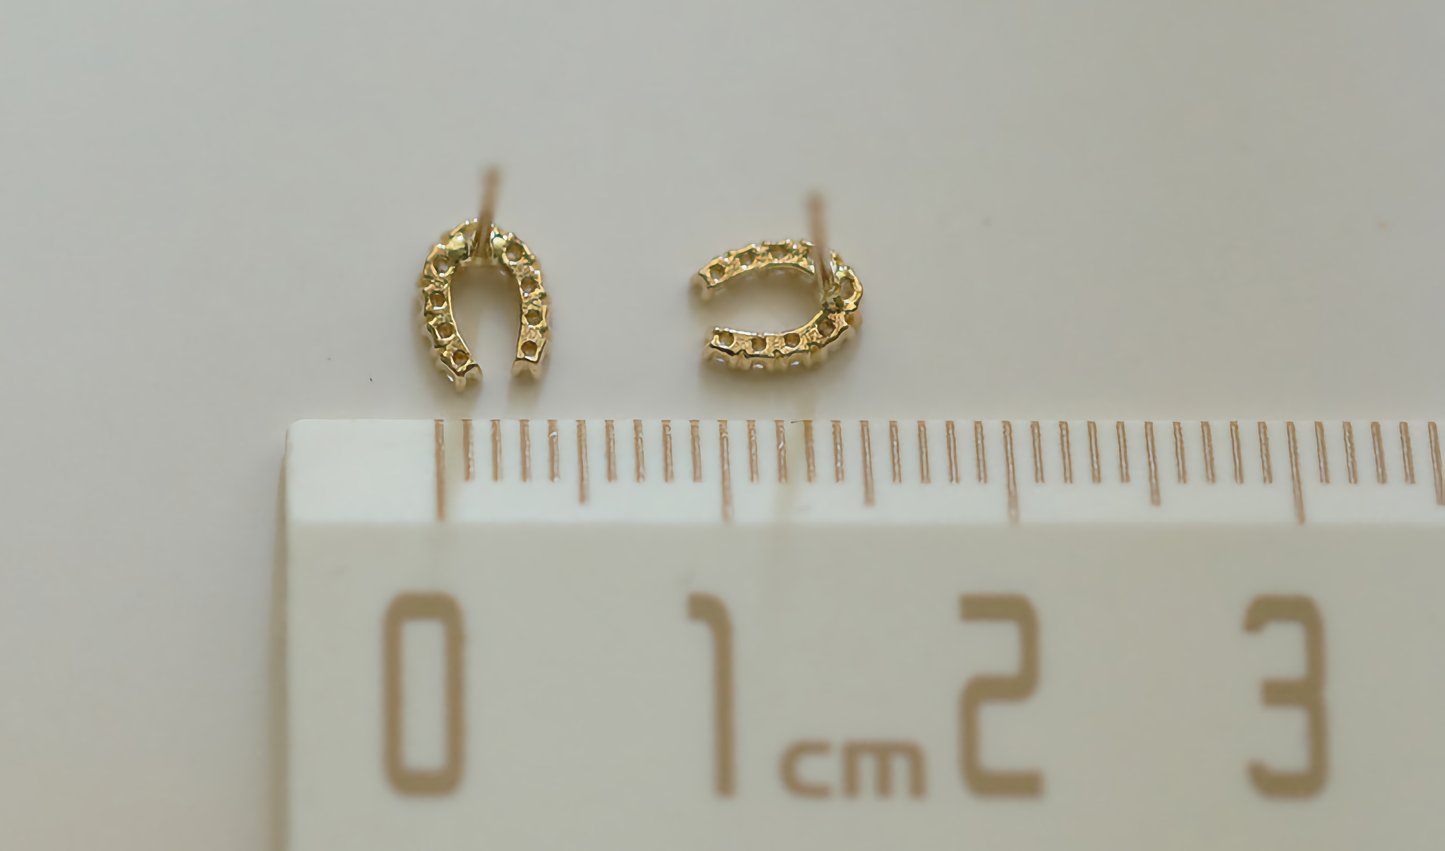 A pair of 9ct solid gold horseshoe earrings, delicately crafted to serve as both a fashionable accessory and a lucky charm. Measuring 5mm dainty size.